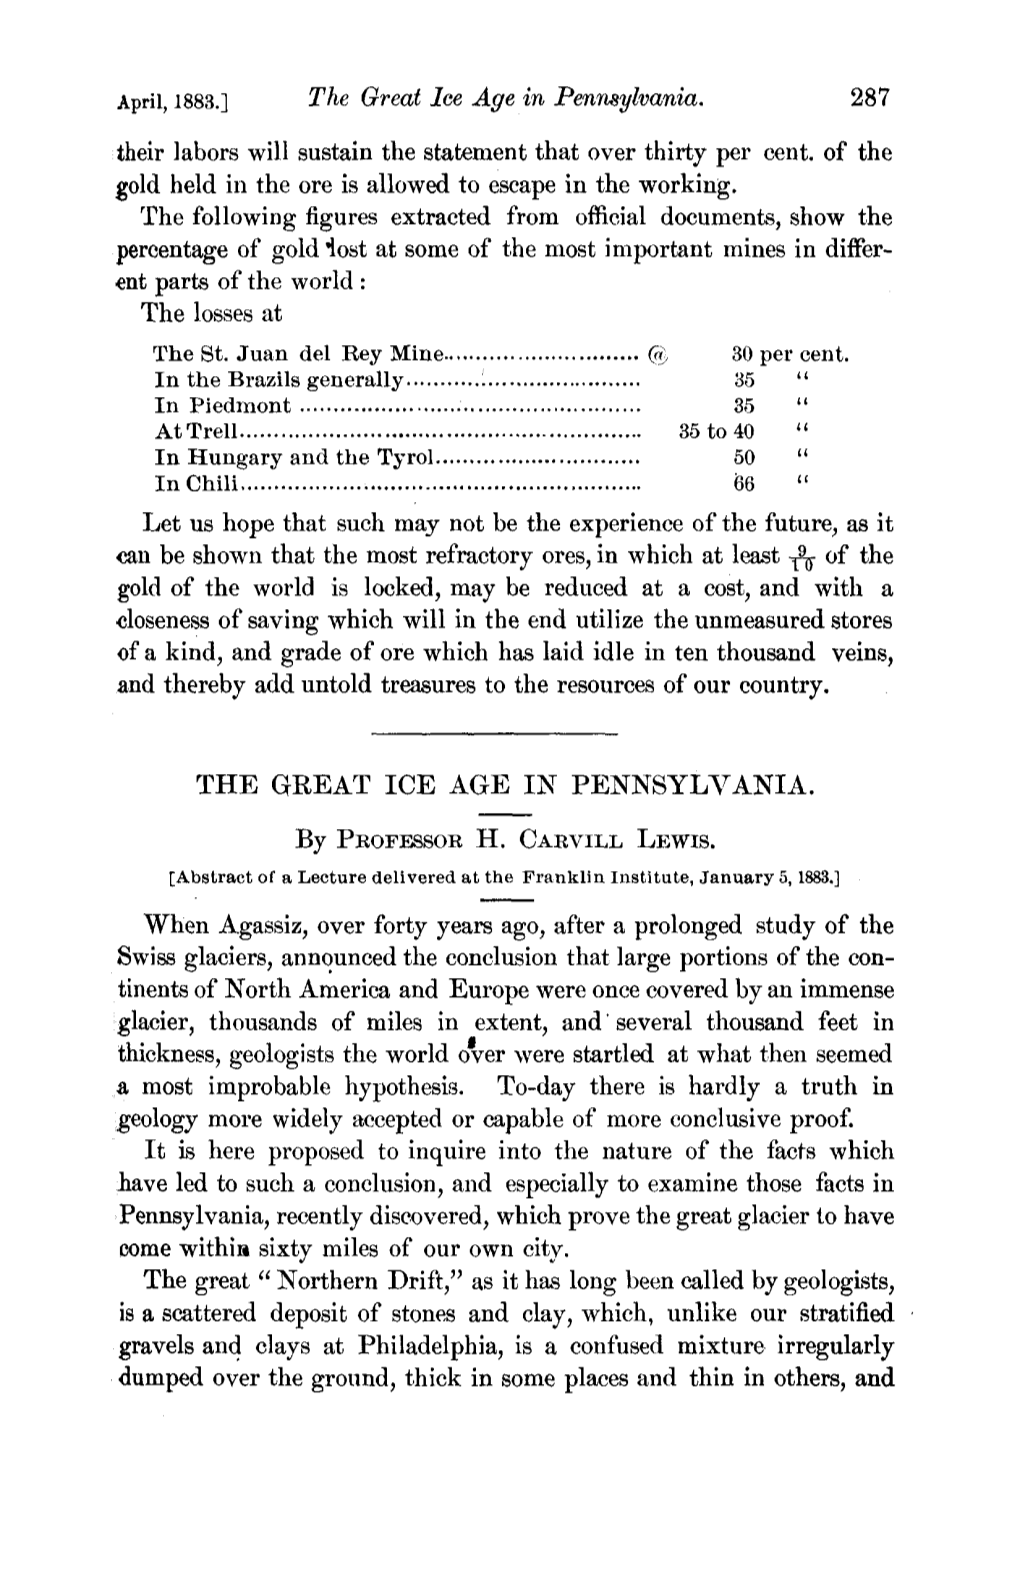 The Great Ice Age in Pennsylvania. 287 Their Labors Will Sustain the Statement That Over Thirty Per Cent